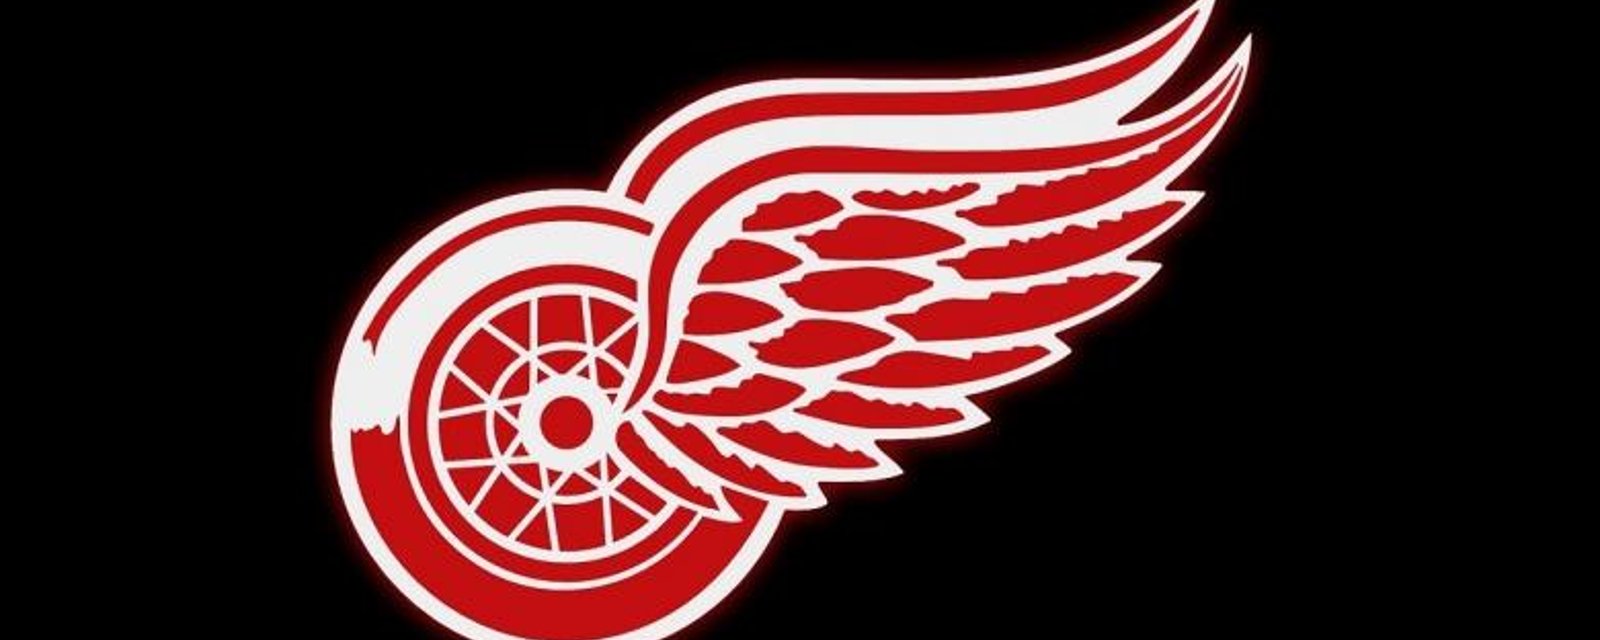 Breaking: The Detroit Red Wings have traded their first round draft pick!